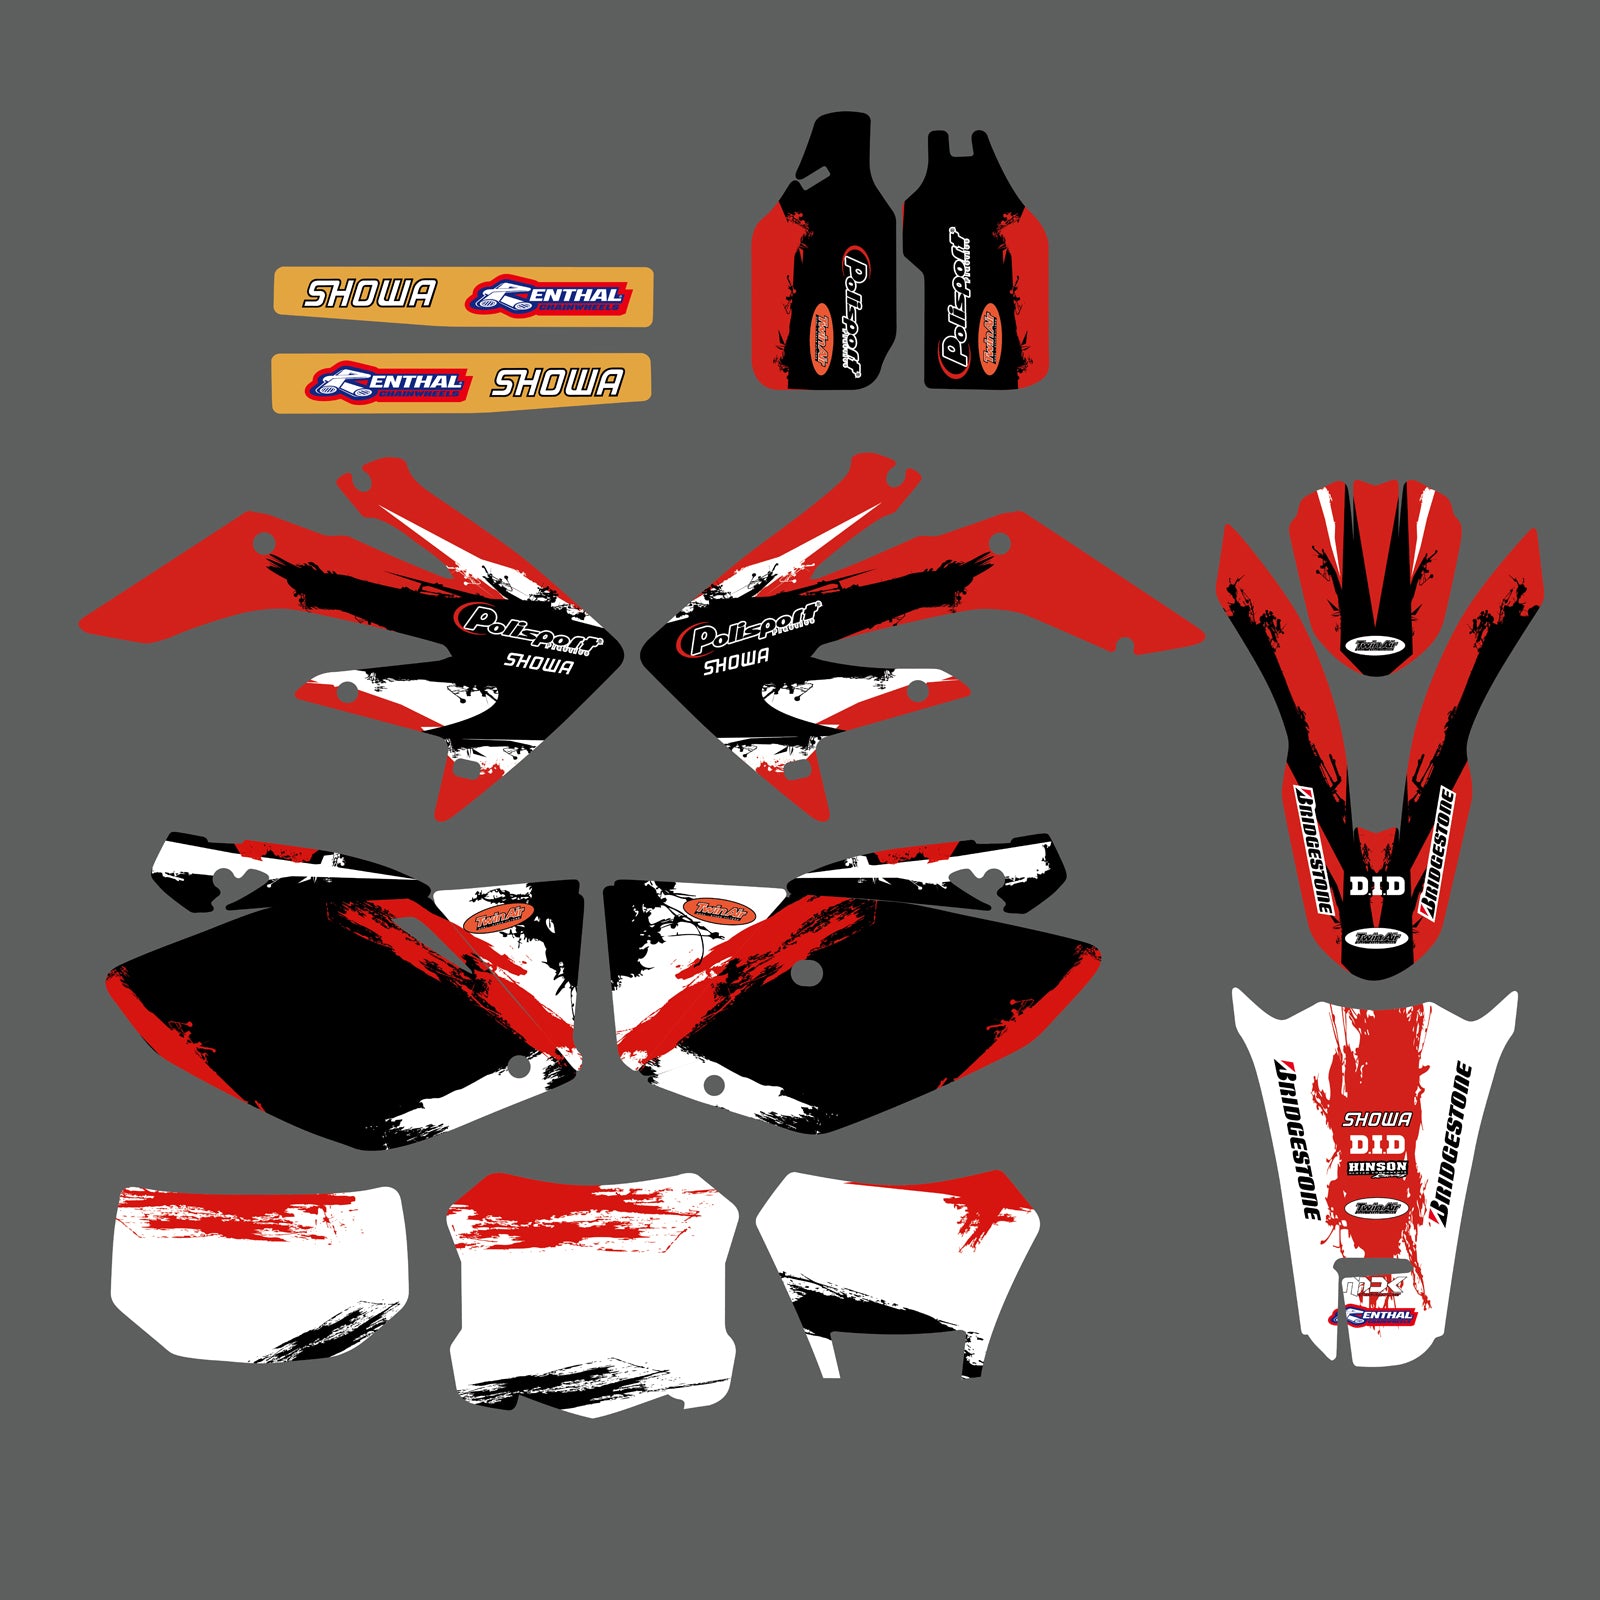 Team Graphics Backgrounds Decals Stickers For HONDA CRF250X 2004-2012